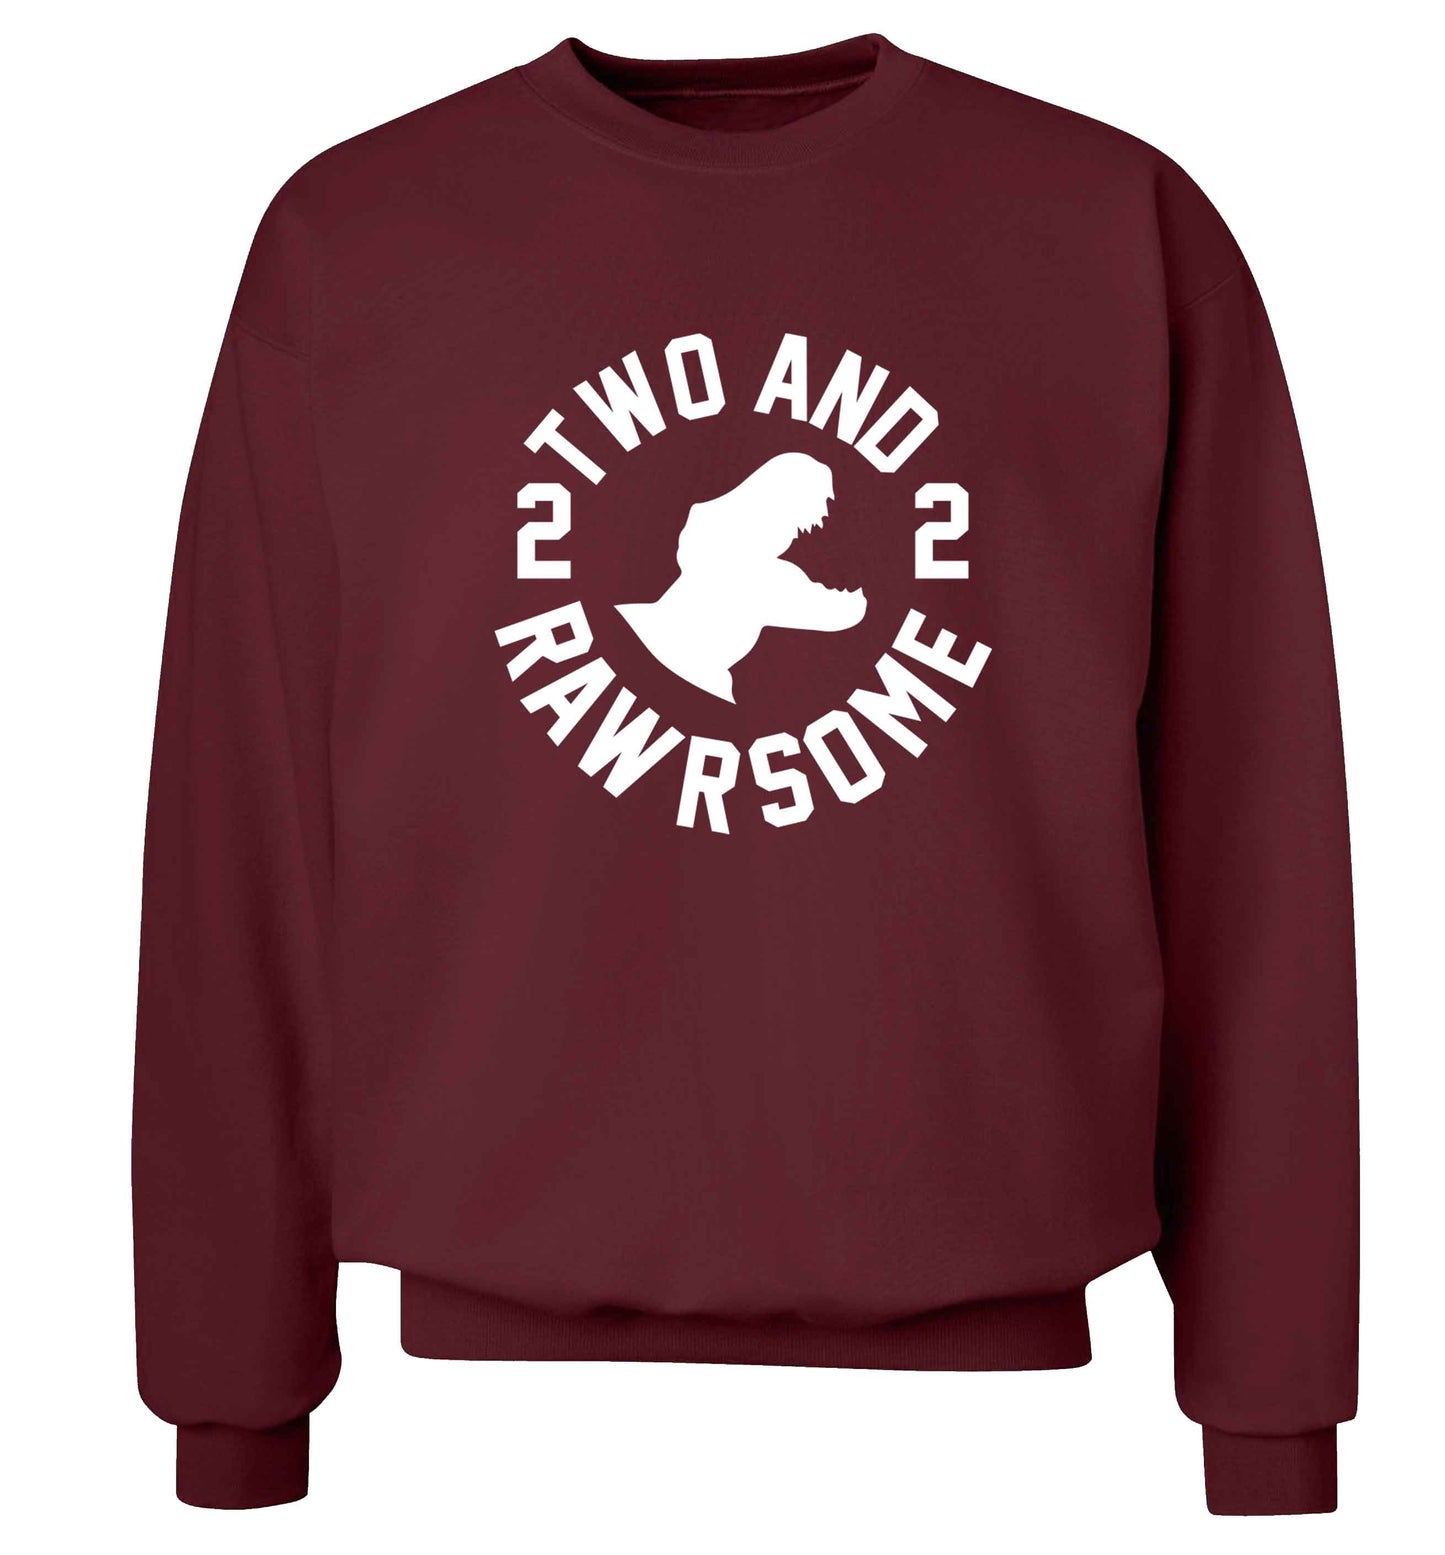 Two and rawrsome adult's unisex maroon sweater 2XL